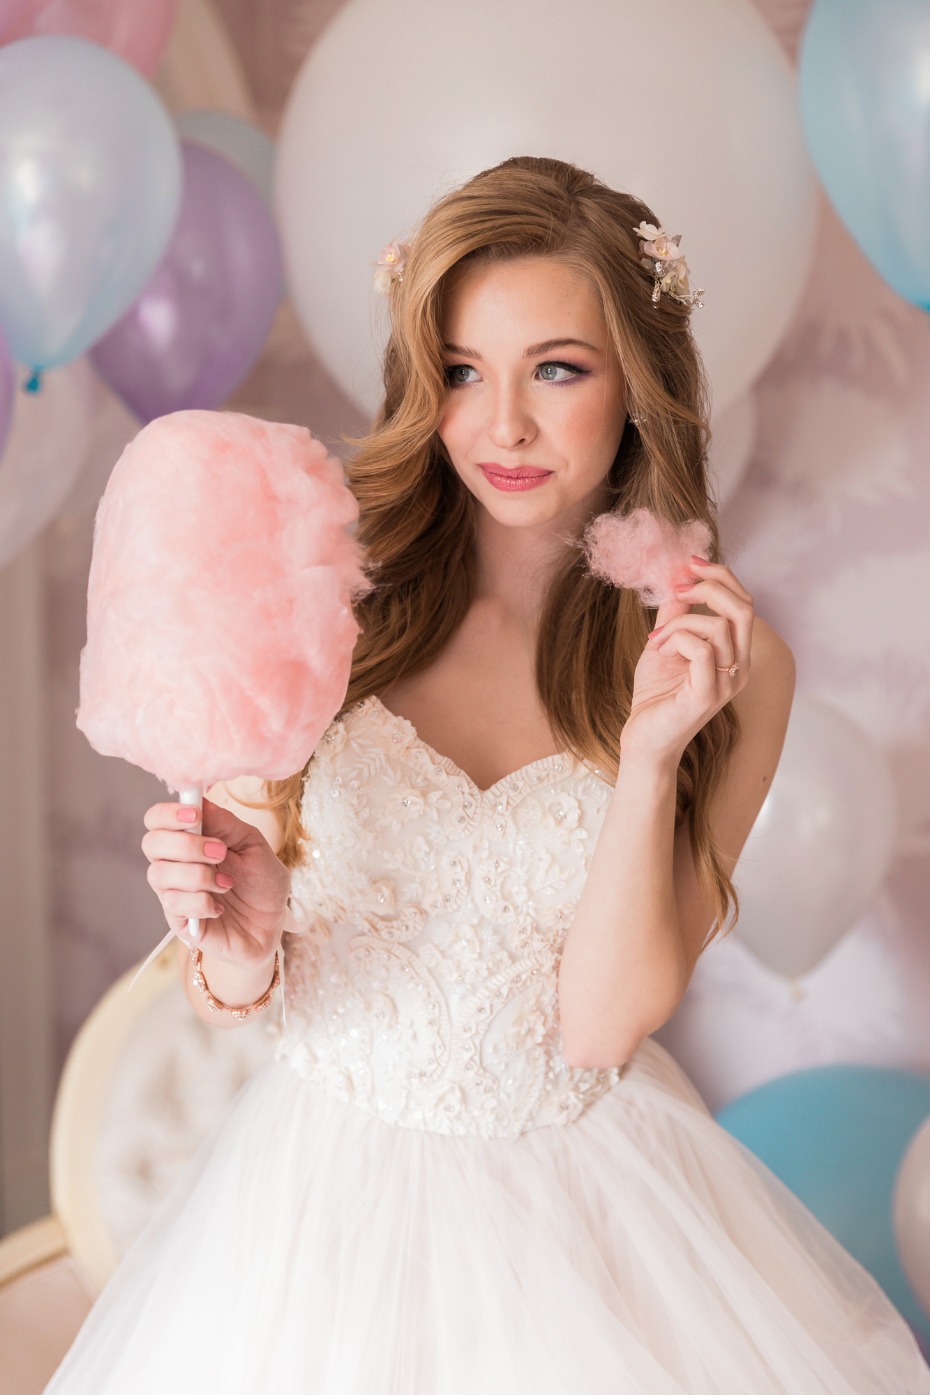 Cotton candy for the bride